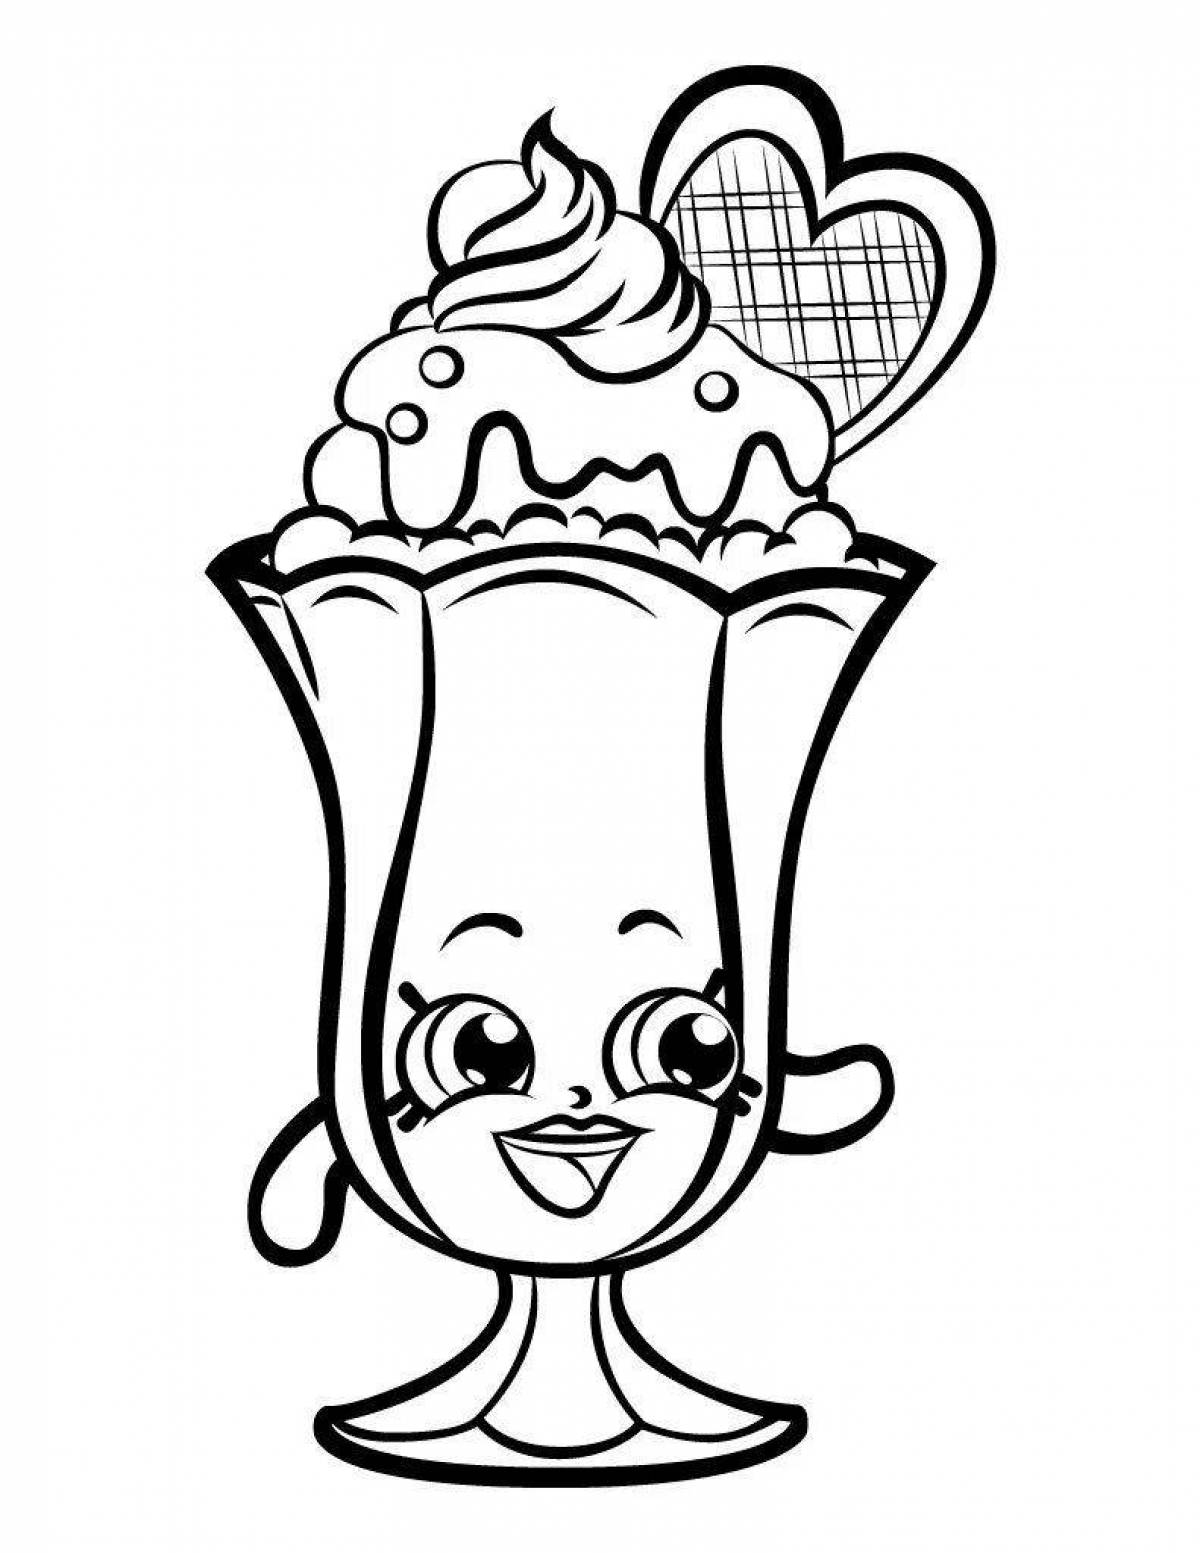 Creative cocktail coloring pages for kids